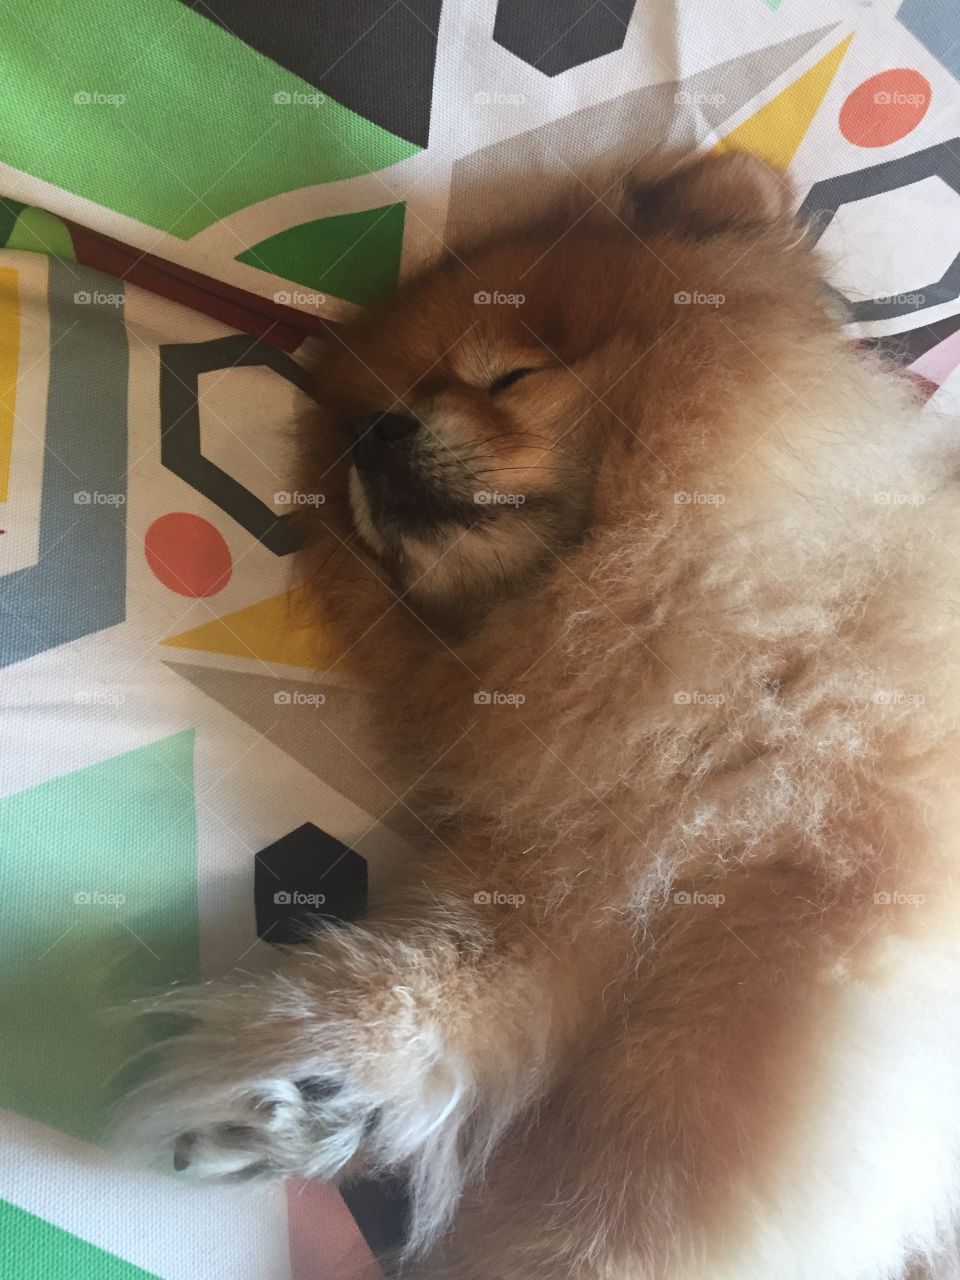 Just a fluffy ball taking his nap.